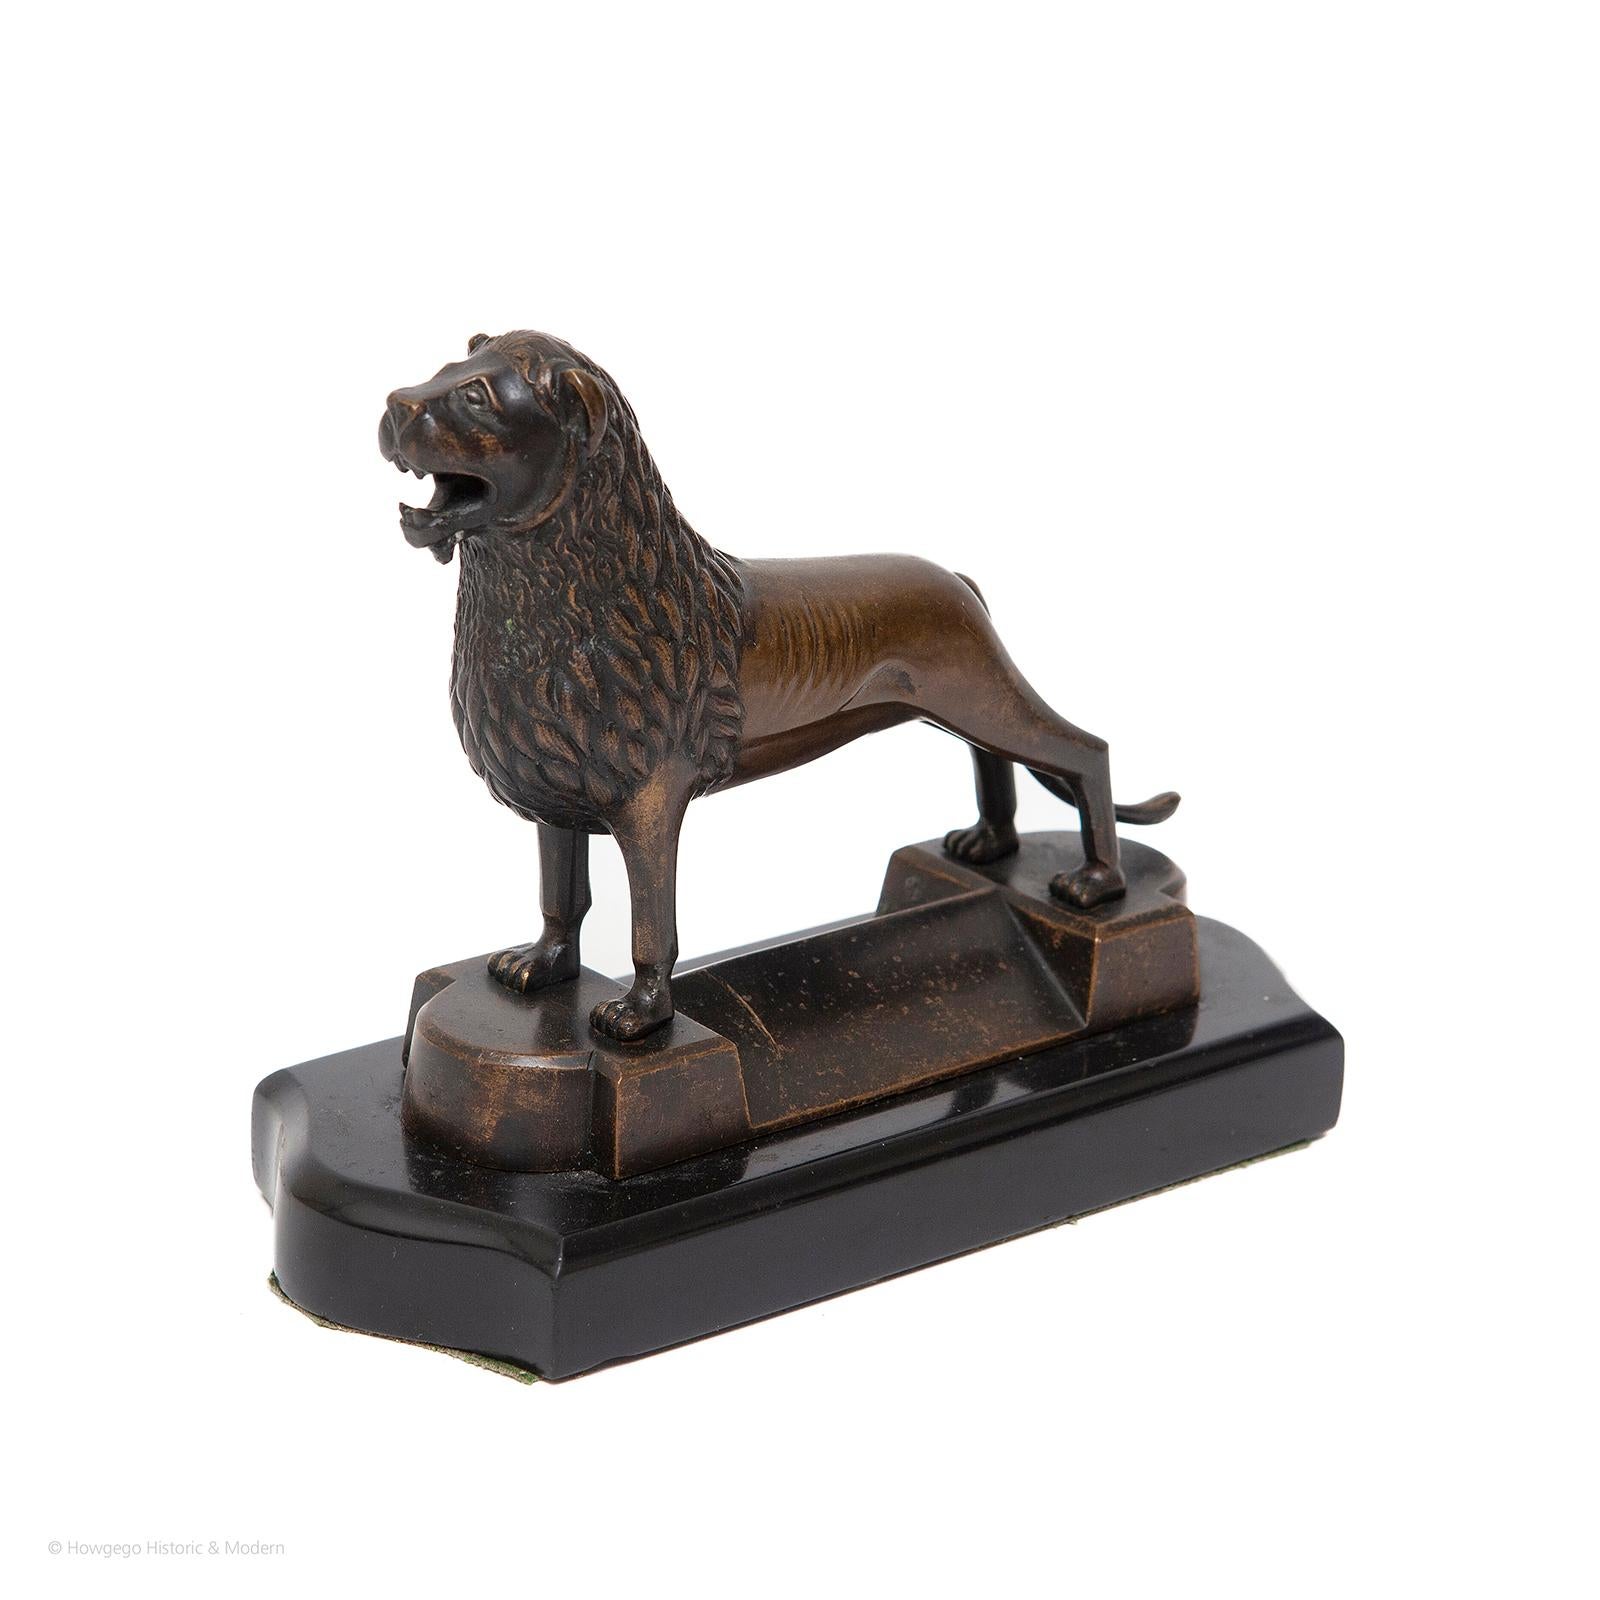 A German bronze model of the medieval Brunswick lion, mounted on a black marble plinth, late-19th century,

The German prince, Henry, Duke of Saxony and Bavaria, commissioned the original sculpture and placed it in front of his castle at Brunswick